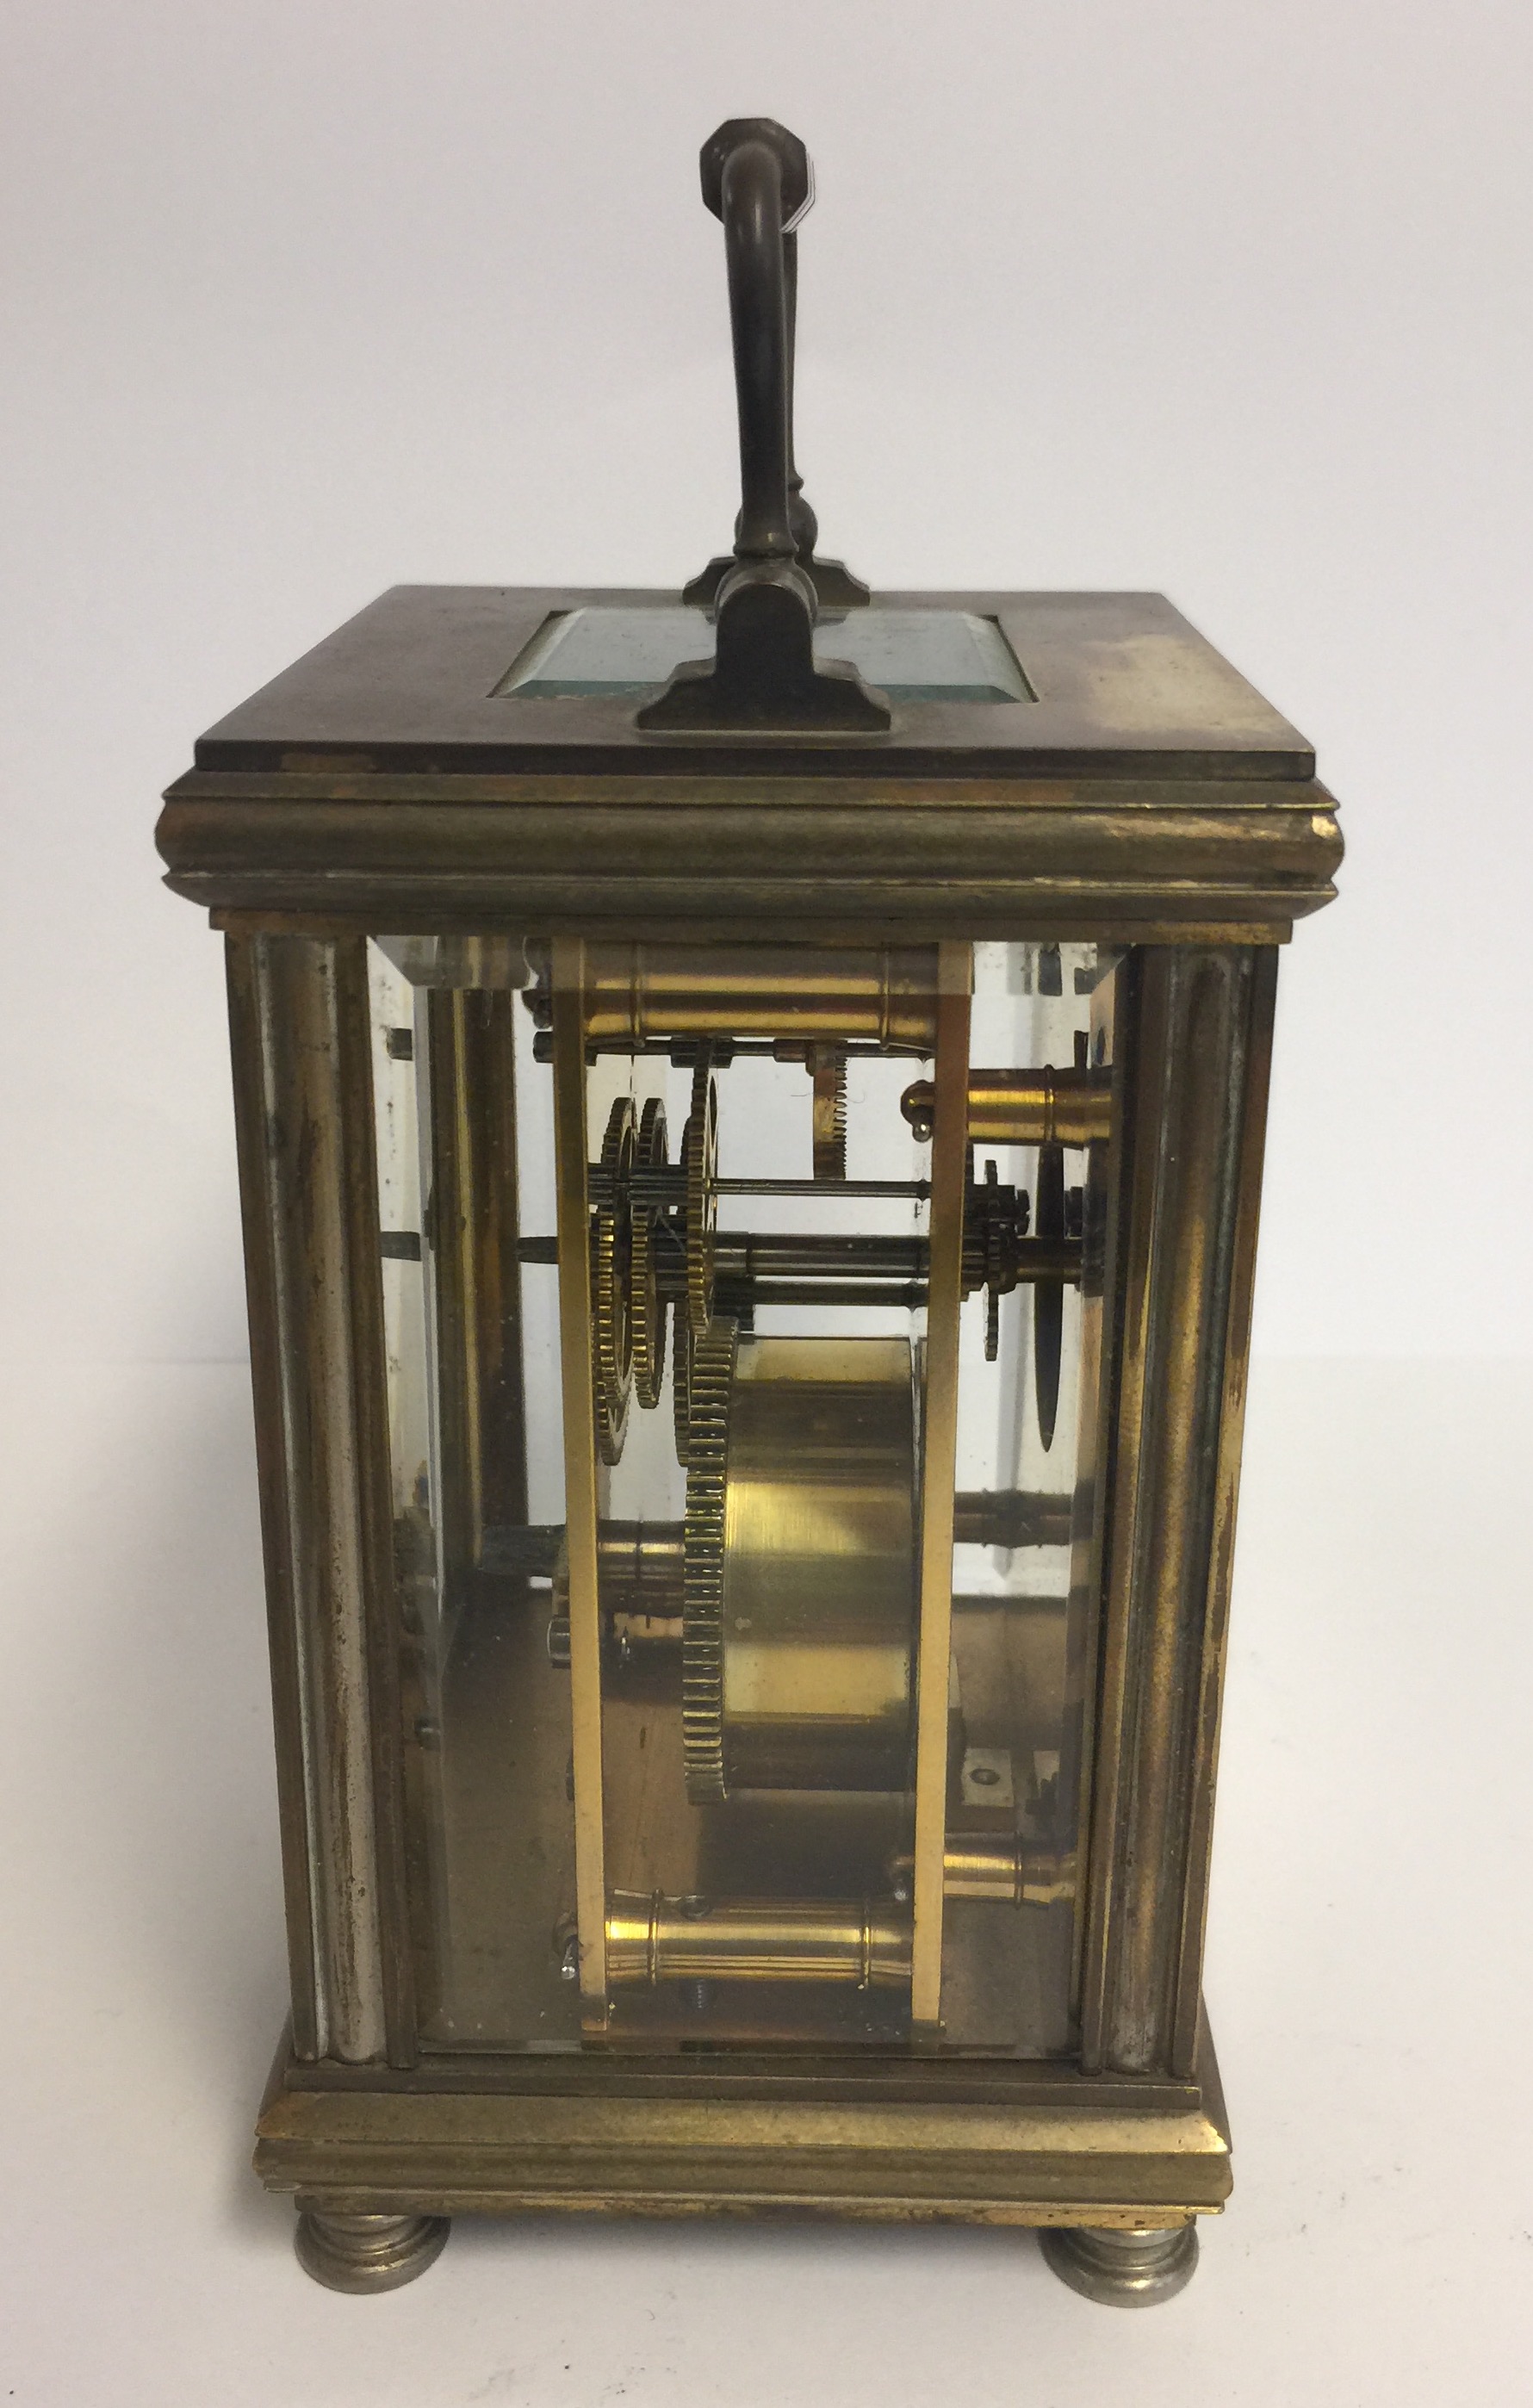 A LATE 19TH/20TH CENTURY BRASS CASED CARRIAGE CLOCK. (12cm x 7cm x 7.5cm) - Image 4 of 5